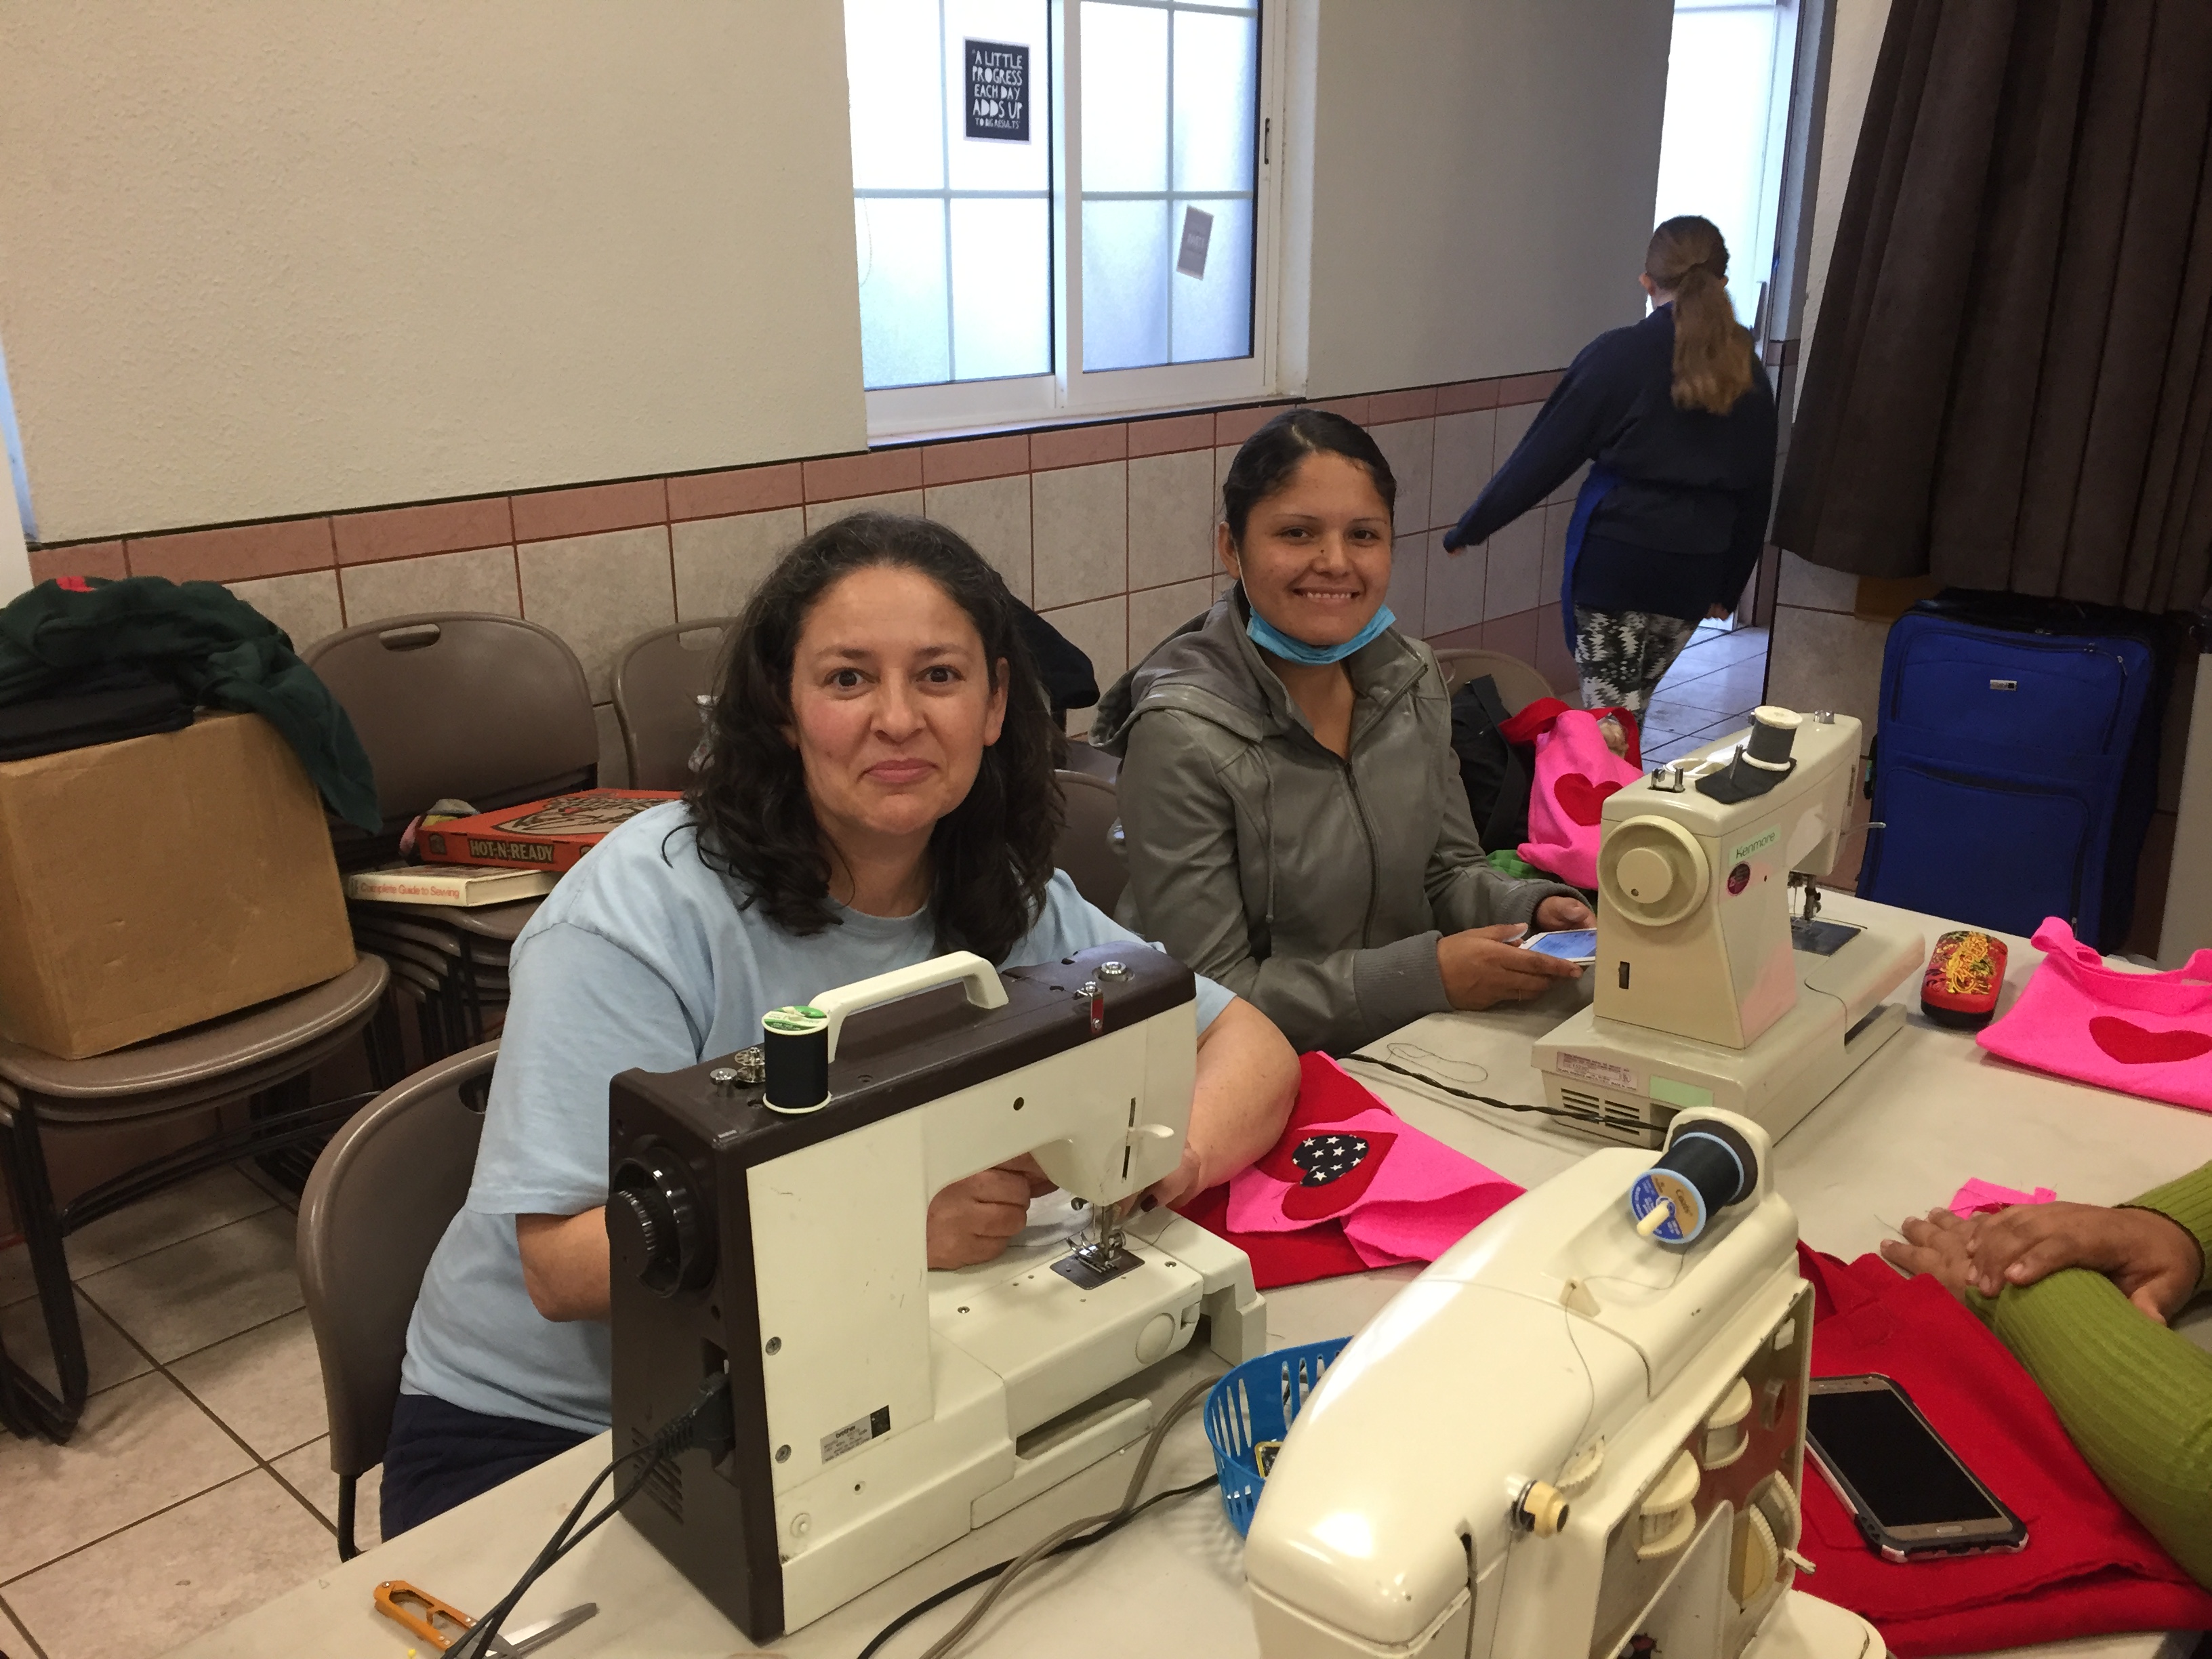 Sewing School in Mexico - Sew Much Hope